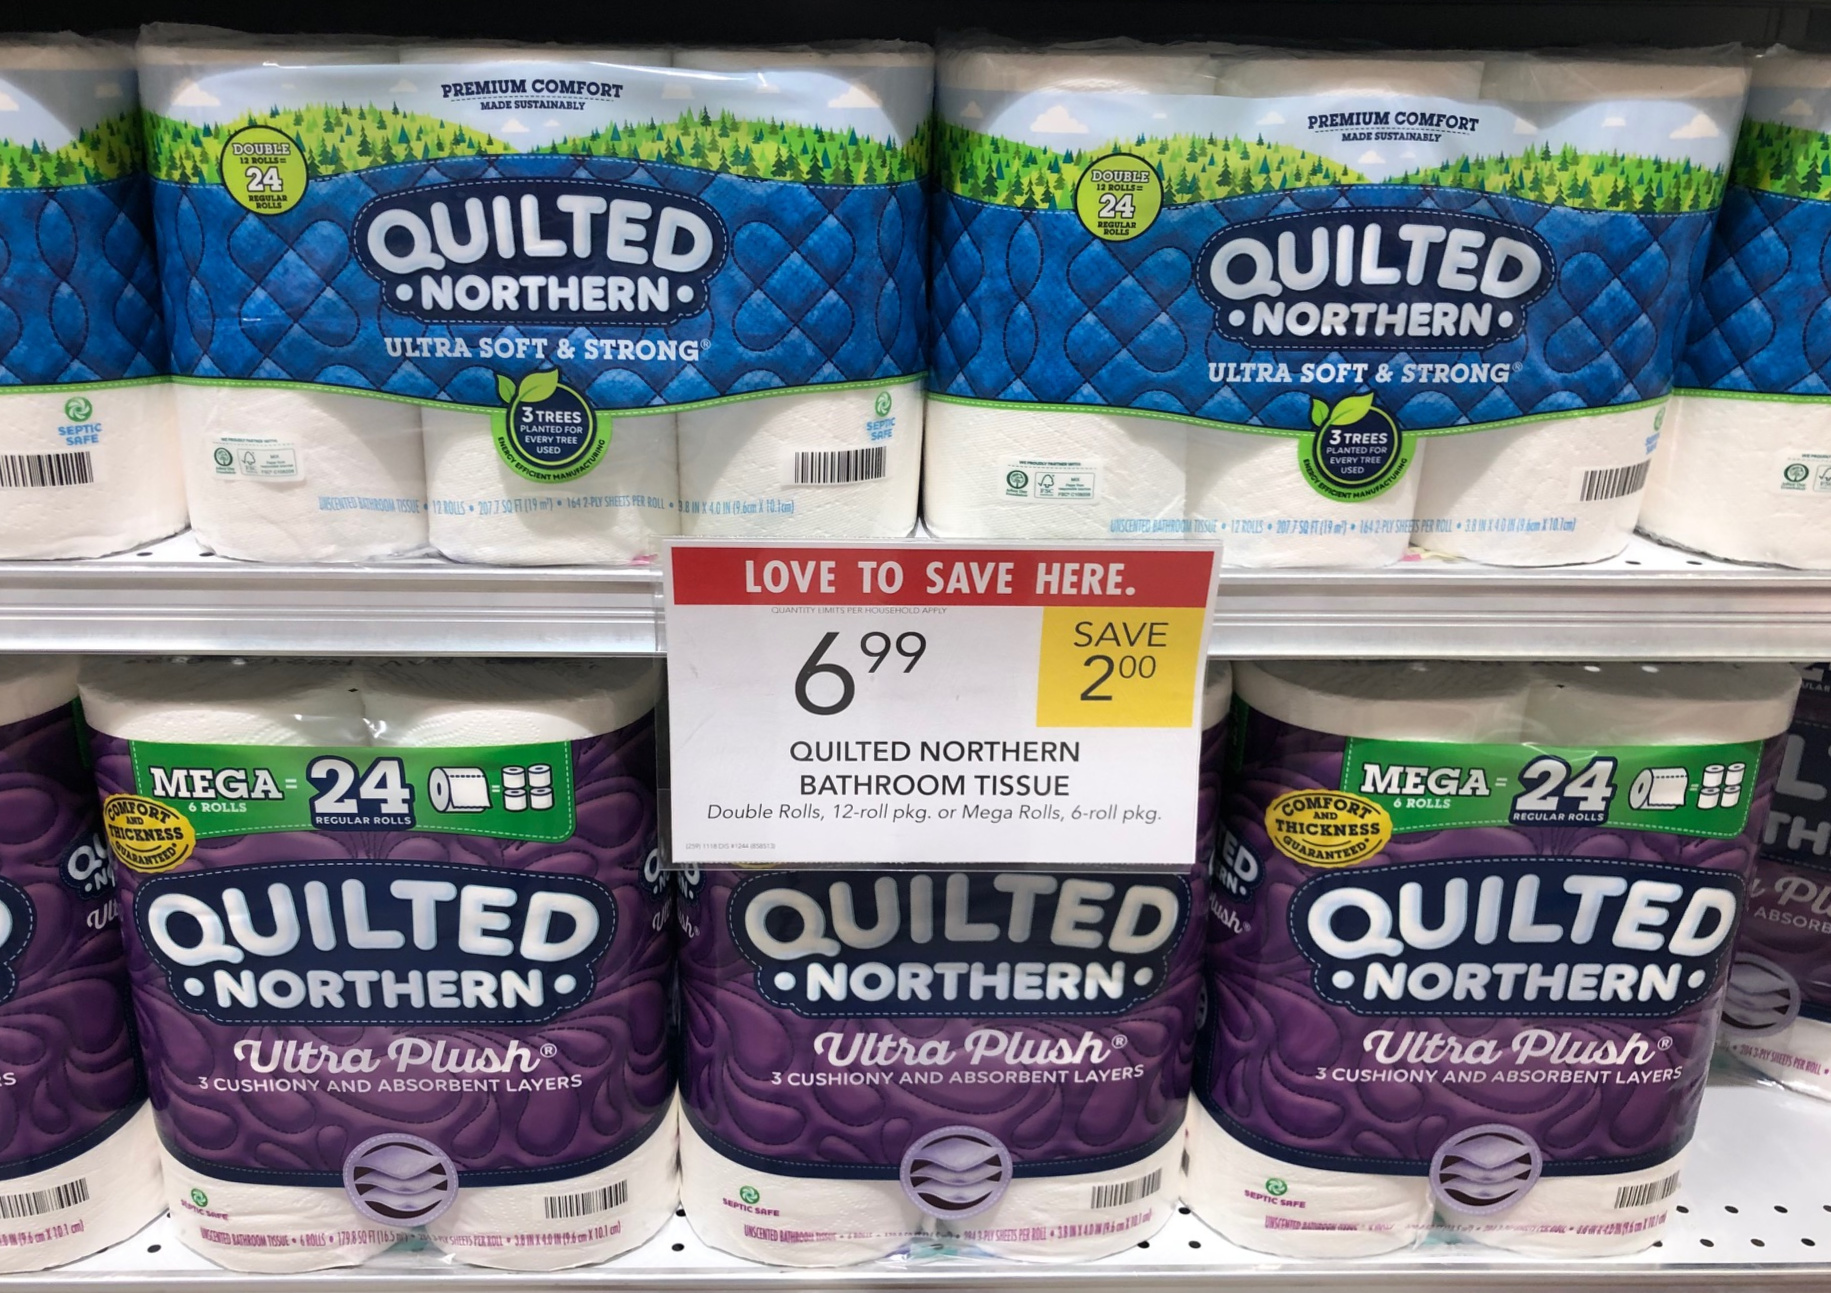 Quilted Northern Bathroom Tissue As Low As $5.99 At Publix on I Heart Publix 3